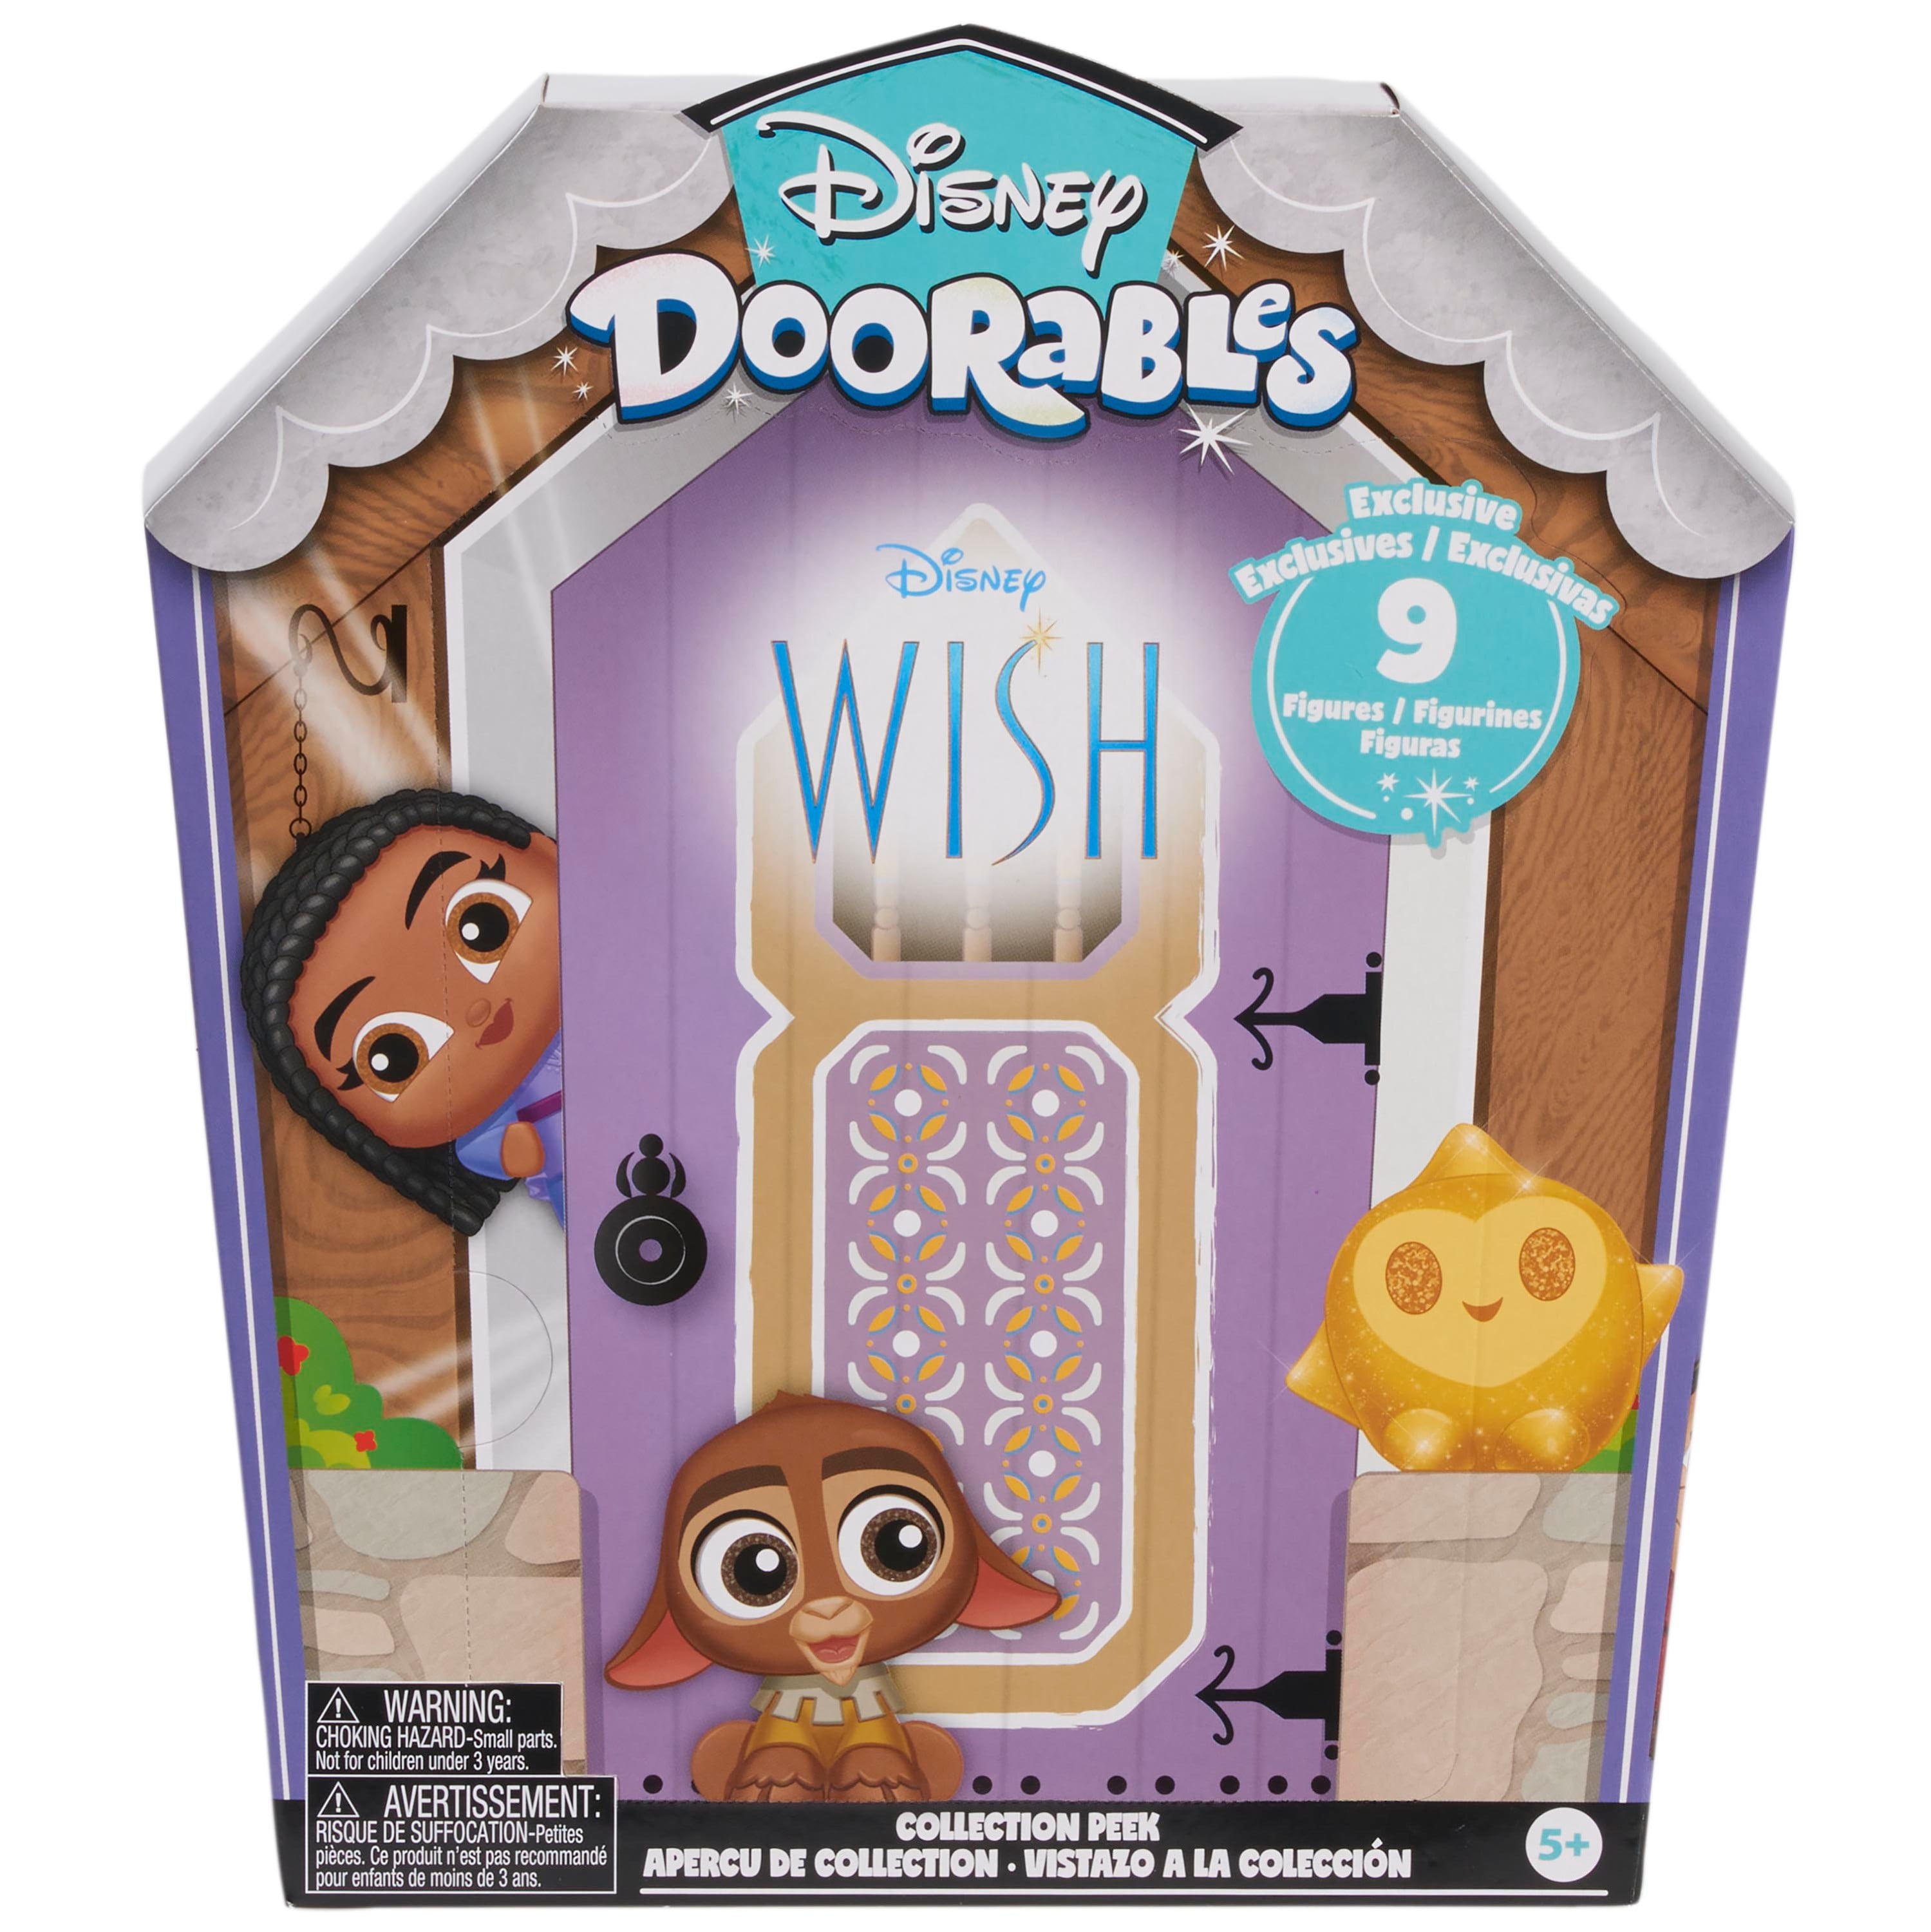 Disney Doorables Villain Collection Peek, Includes 12 Exclusive Mini  Figures, Styles May Vary, Officially Licensed Kids Toys for Ages 5 Up